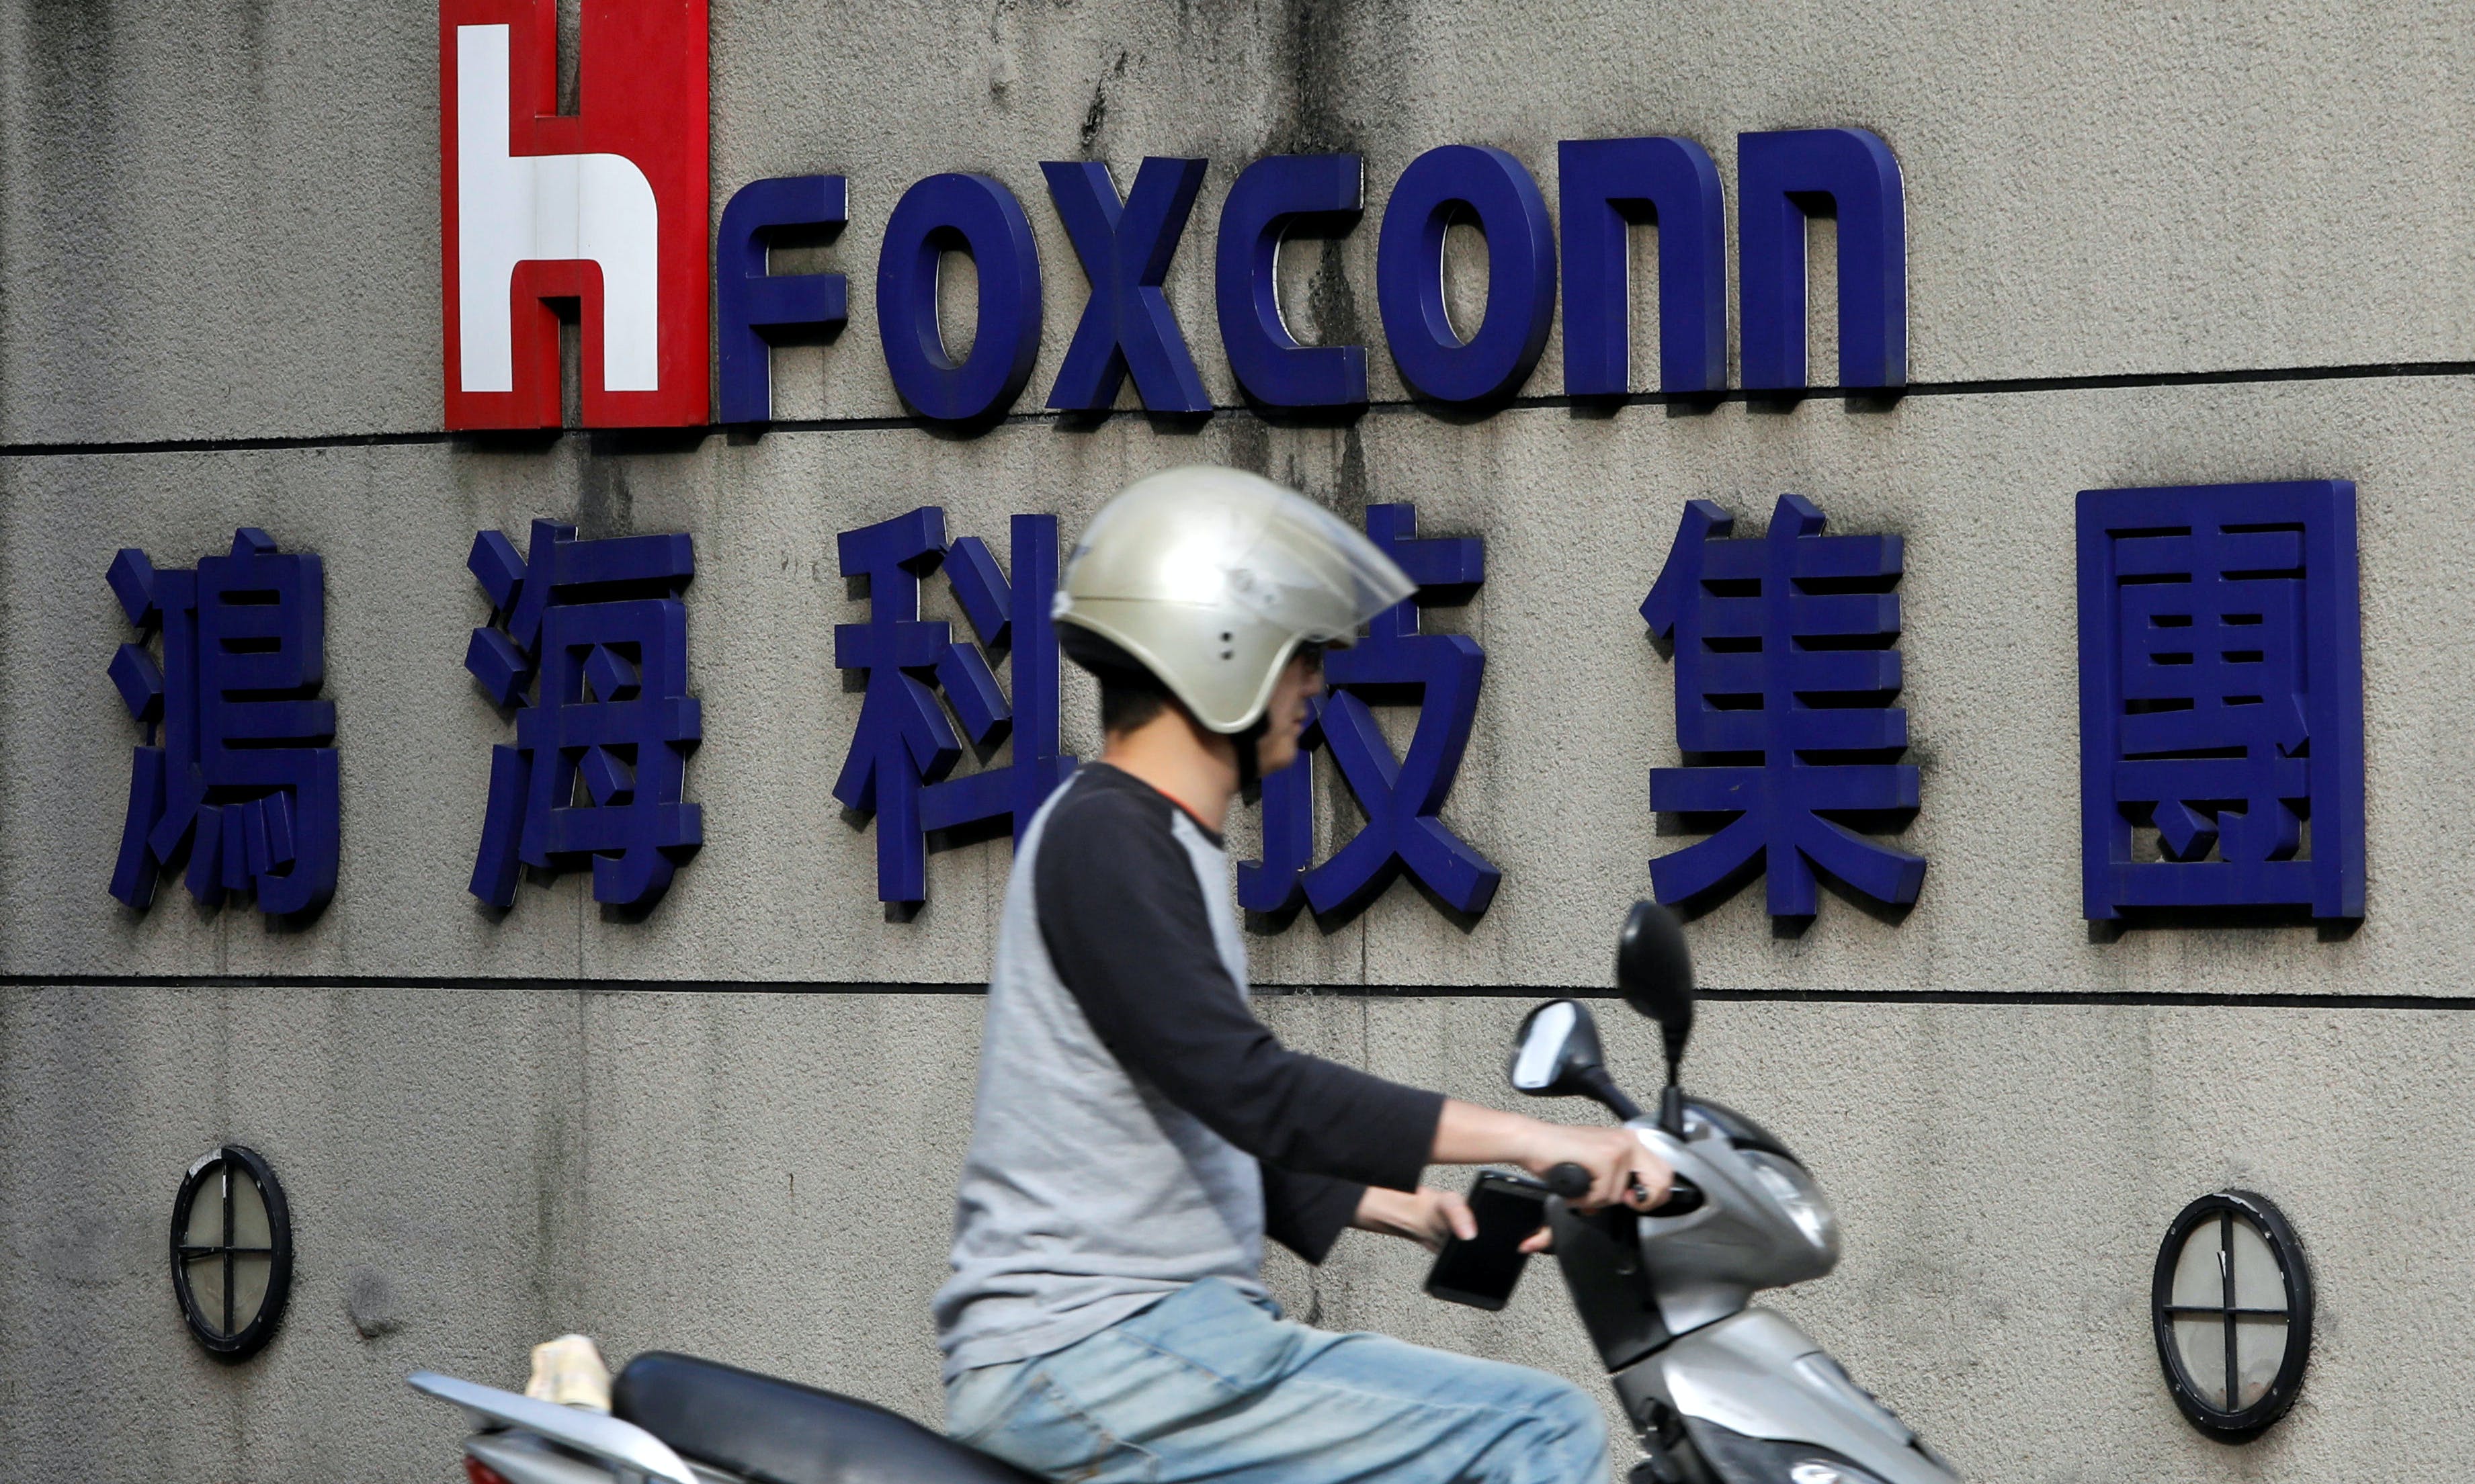 Taiwan's Foxconn Is Considering Opening an iPhone Factory in Vietnam